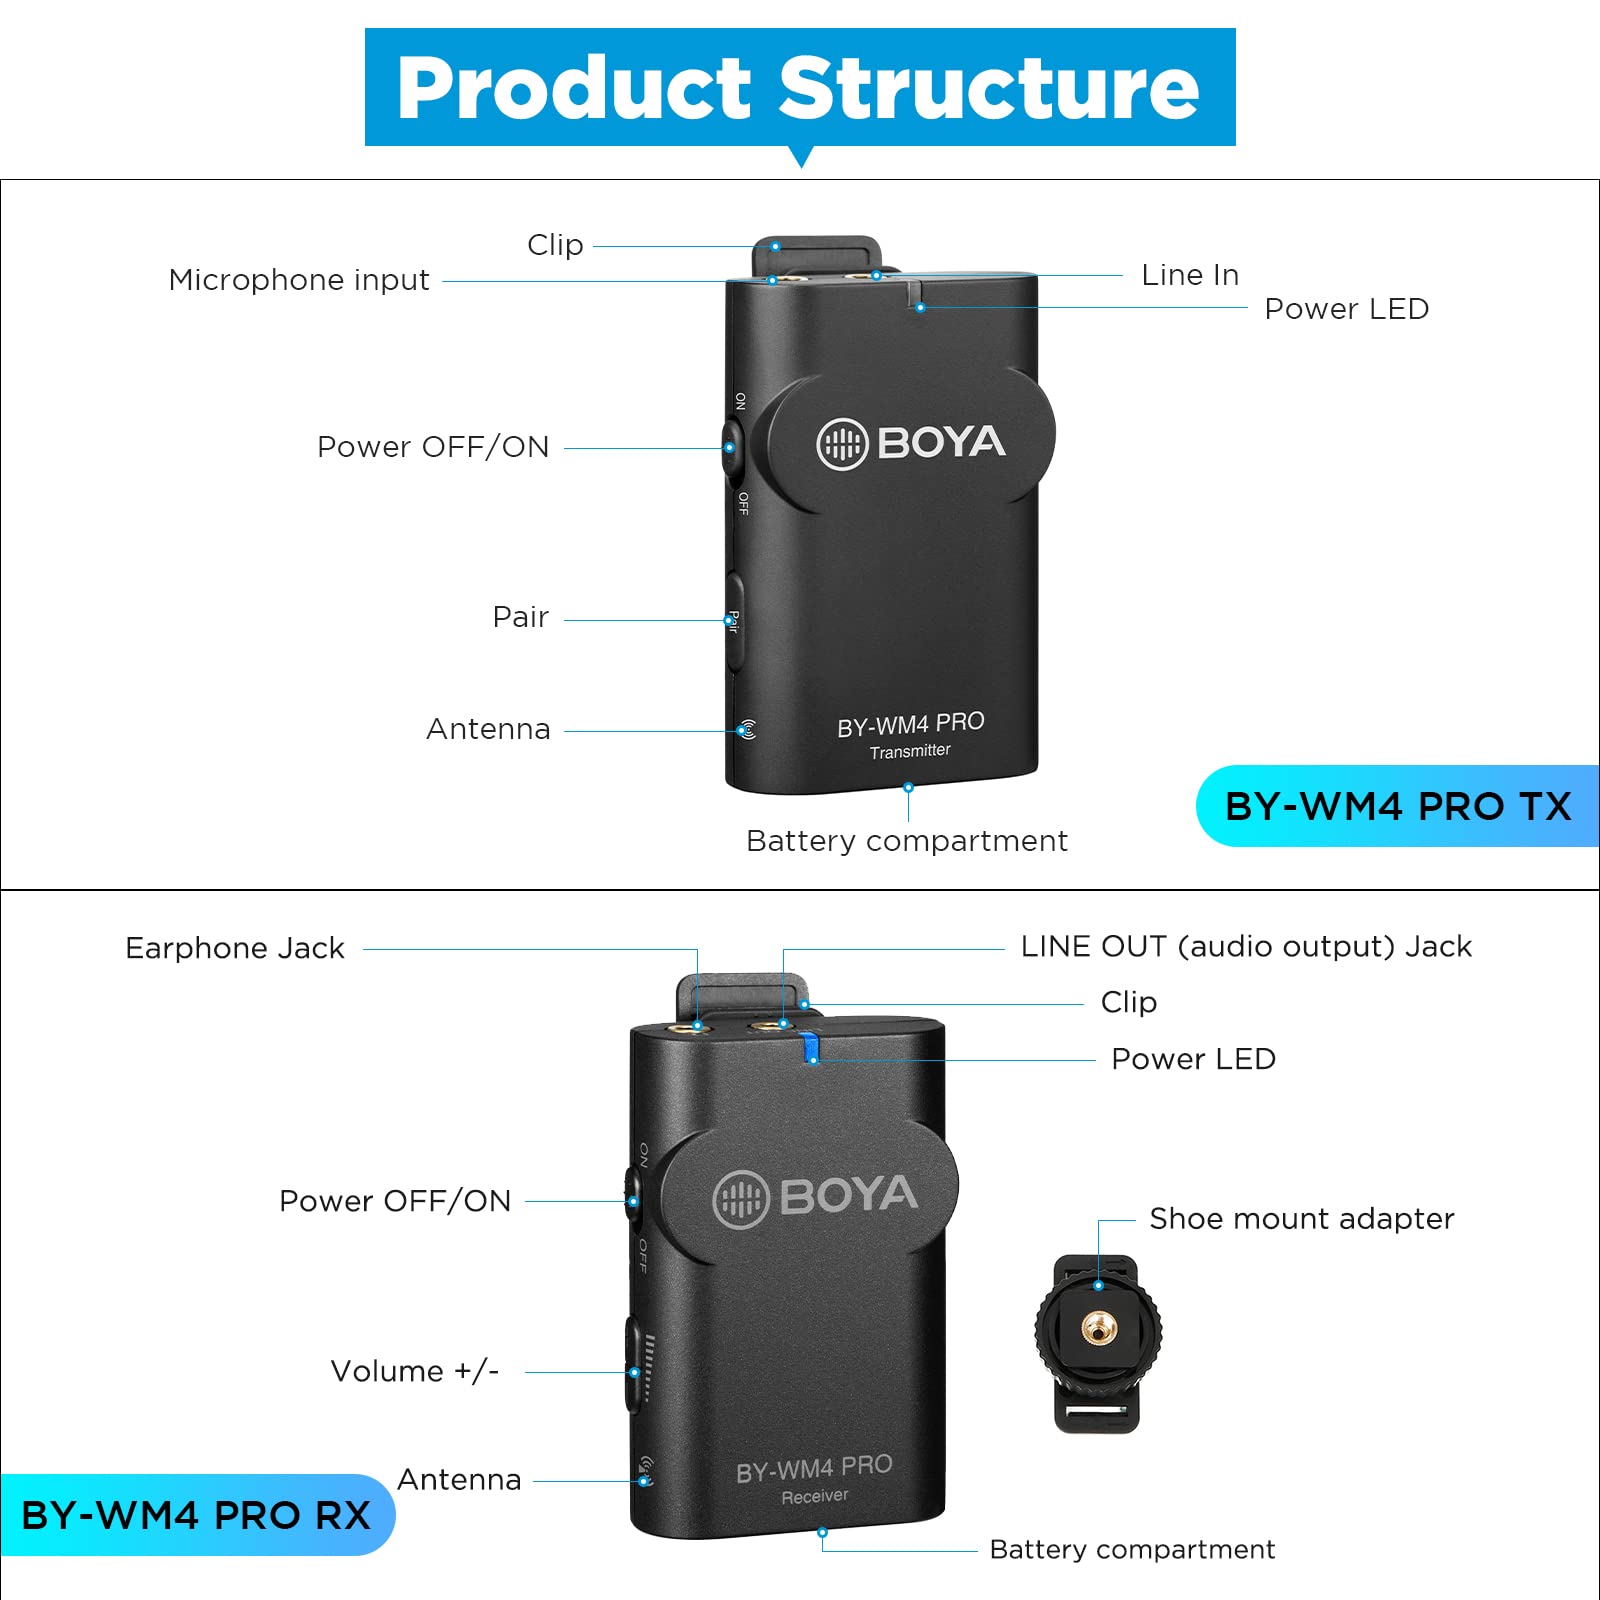 BOYA WM4 PRO 2.4G Wireless Lavalier Microphone system with Canon Nikon Sony DSLR Camera camcorders Youtude Facebook TikTok vlog live streaming interview commentary  - Very Good